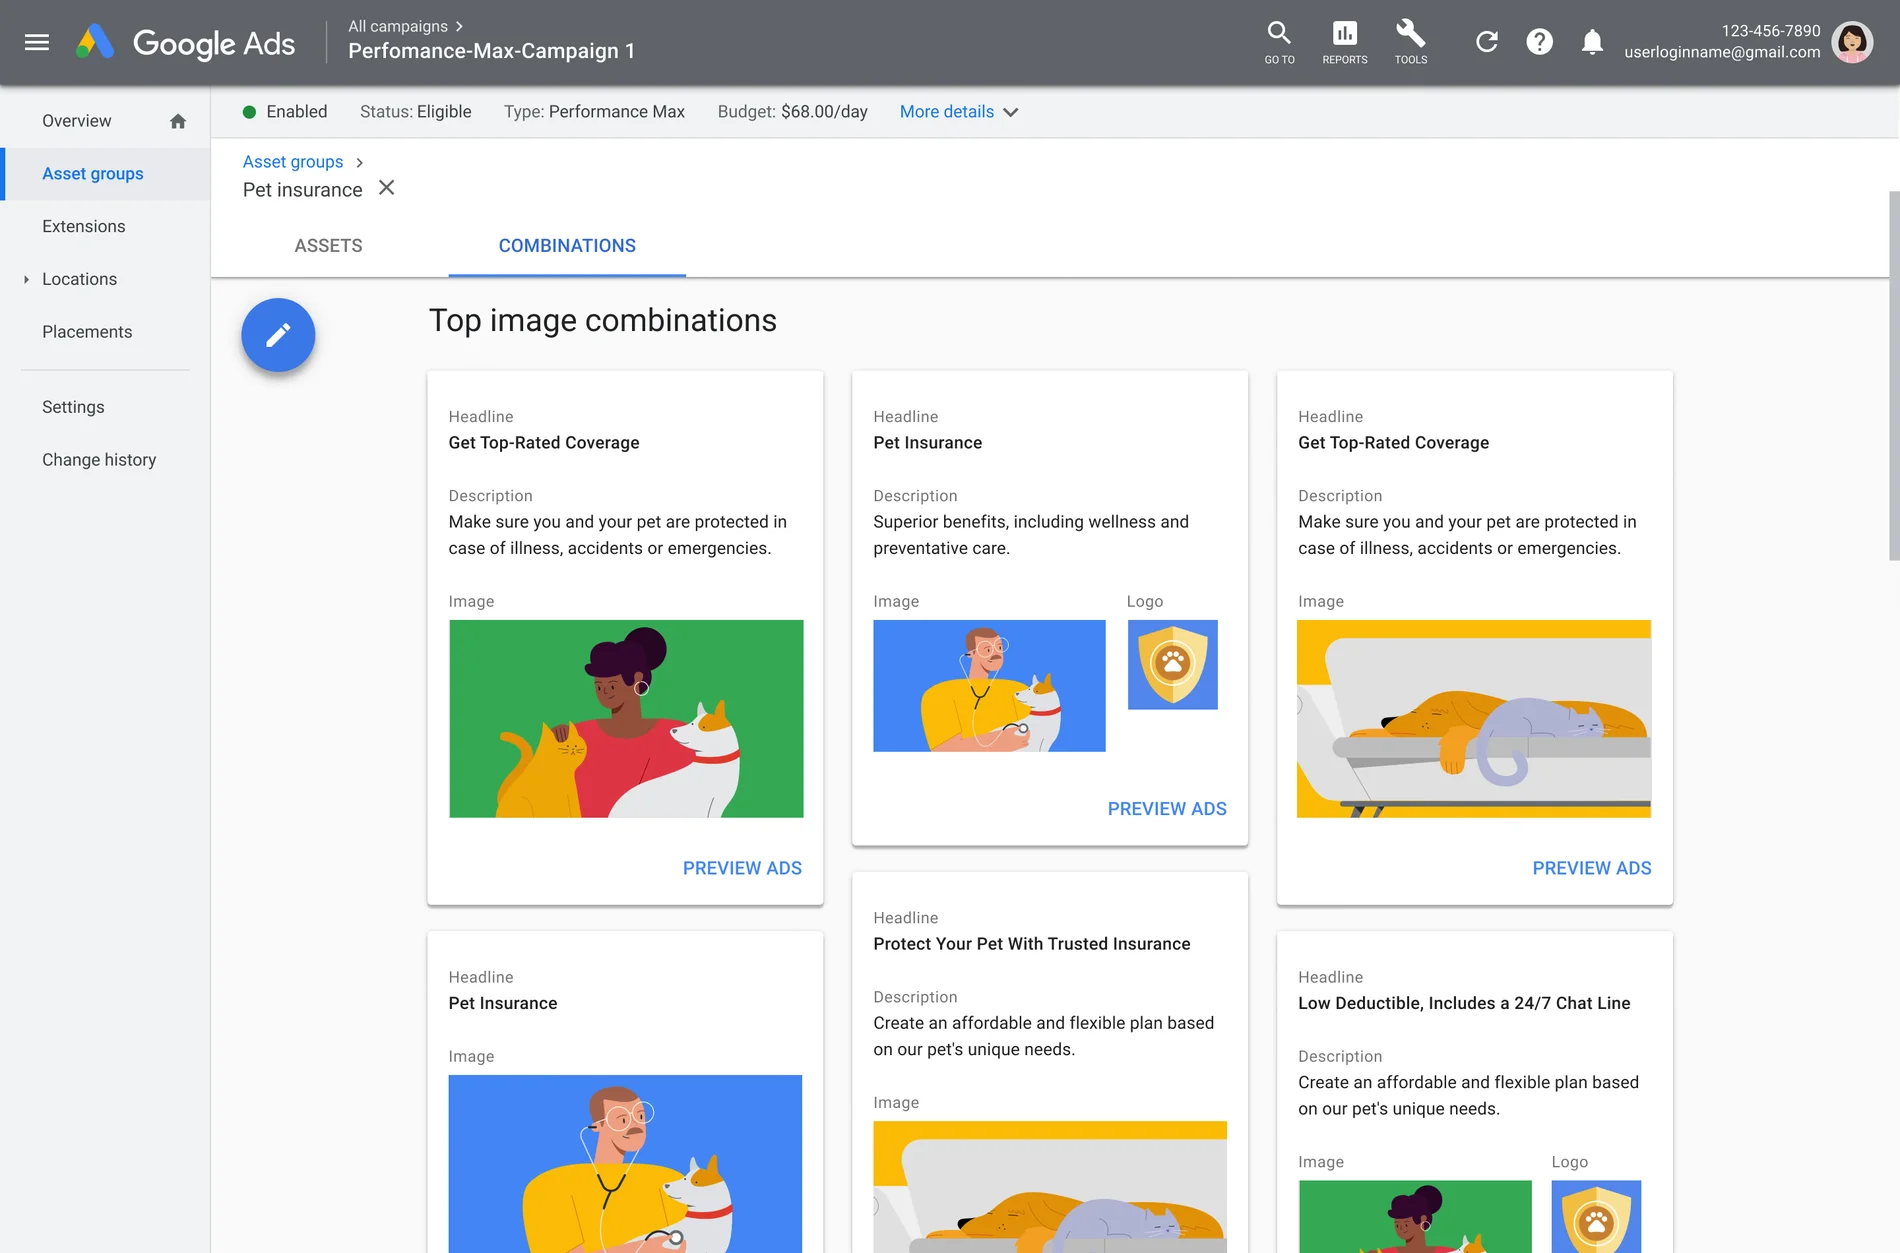 Image of the Combinations report in the Google Ads interface, titled “Top image combinations.” Below are six cards, each with a colorful illustration, including a woman with her cat and dog,  a dog being examined at the vet, and a dog and cat sleeping on the couch next to each other.  An example illustrated logo shows an animal paw superimposed on a shield. Text headlines are: “Get top-rated coverage”, “Pet insurance”,  “Protect your pet with trusted insurance” and “Low deductible, includes a 24/6 chat line.”  At the bottom right of each card is a blue link to preview each ad.